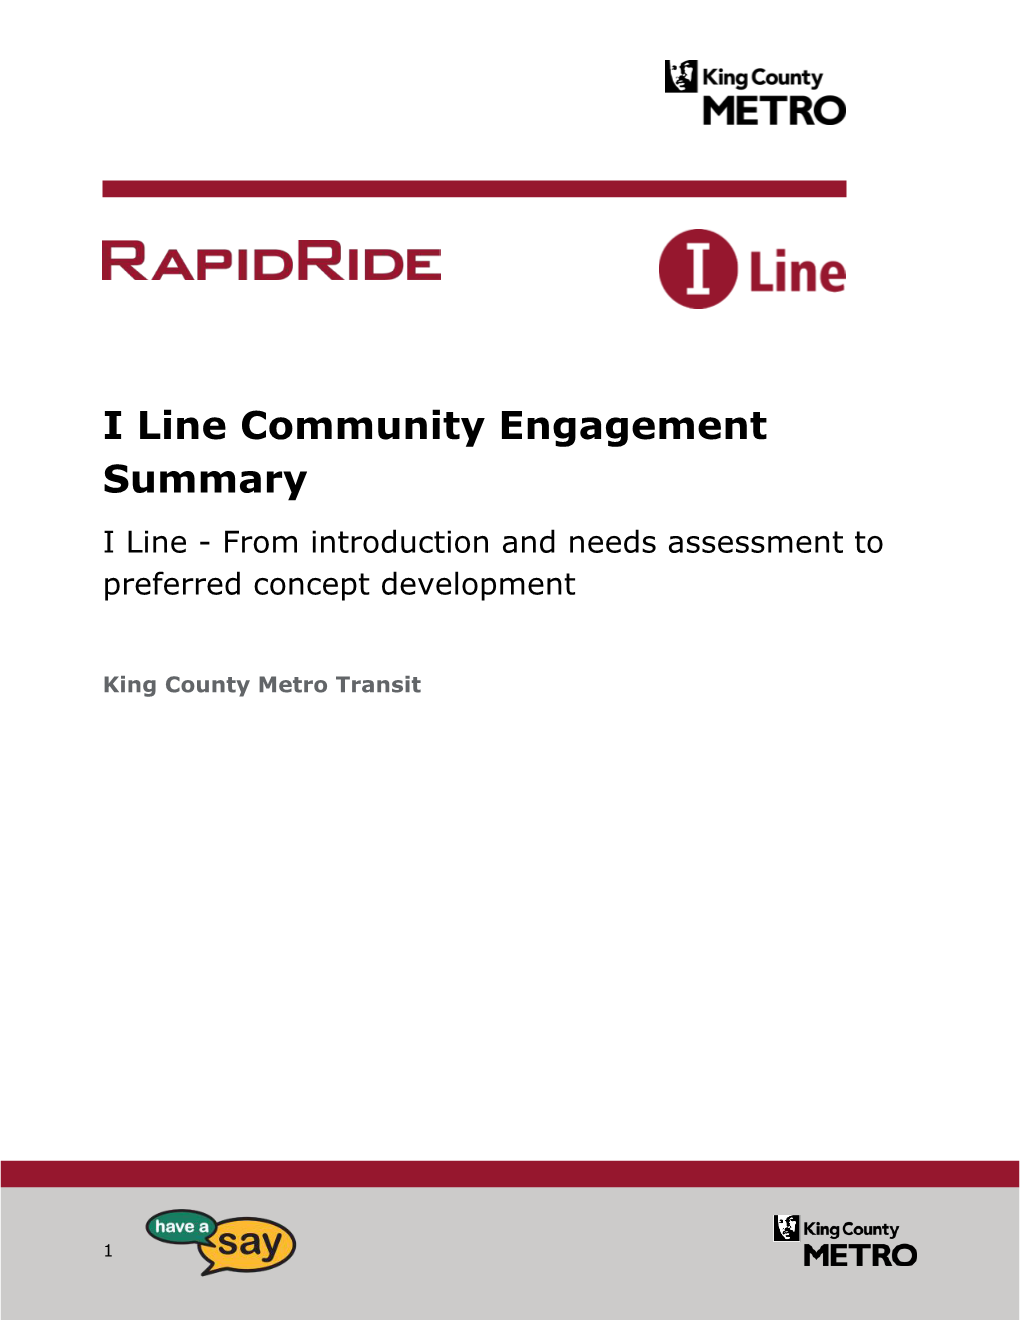 I Line Community Engagement Summary I Line - from Introduction and Needs Assessment to Preferred Concept Development